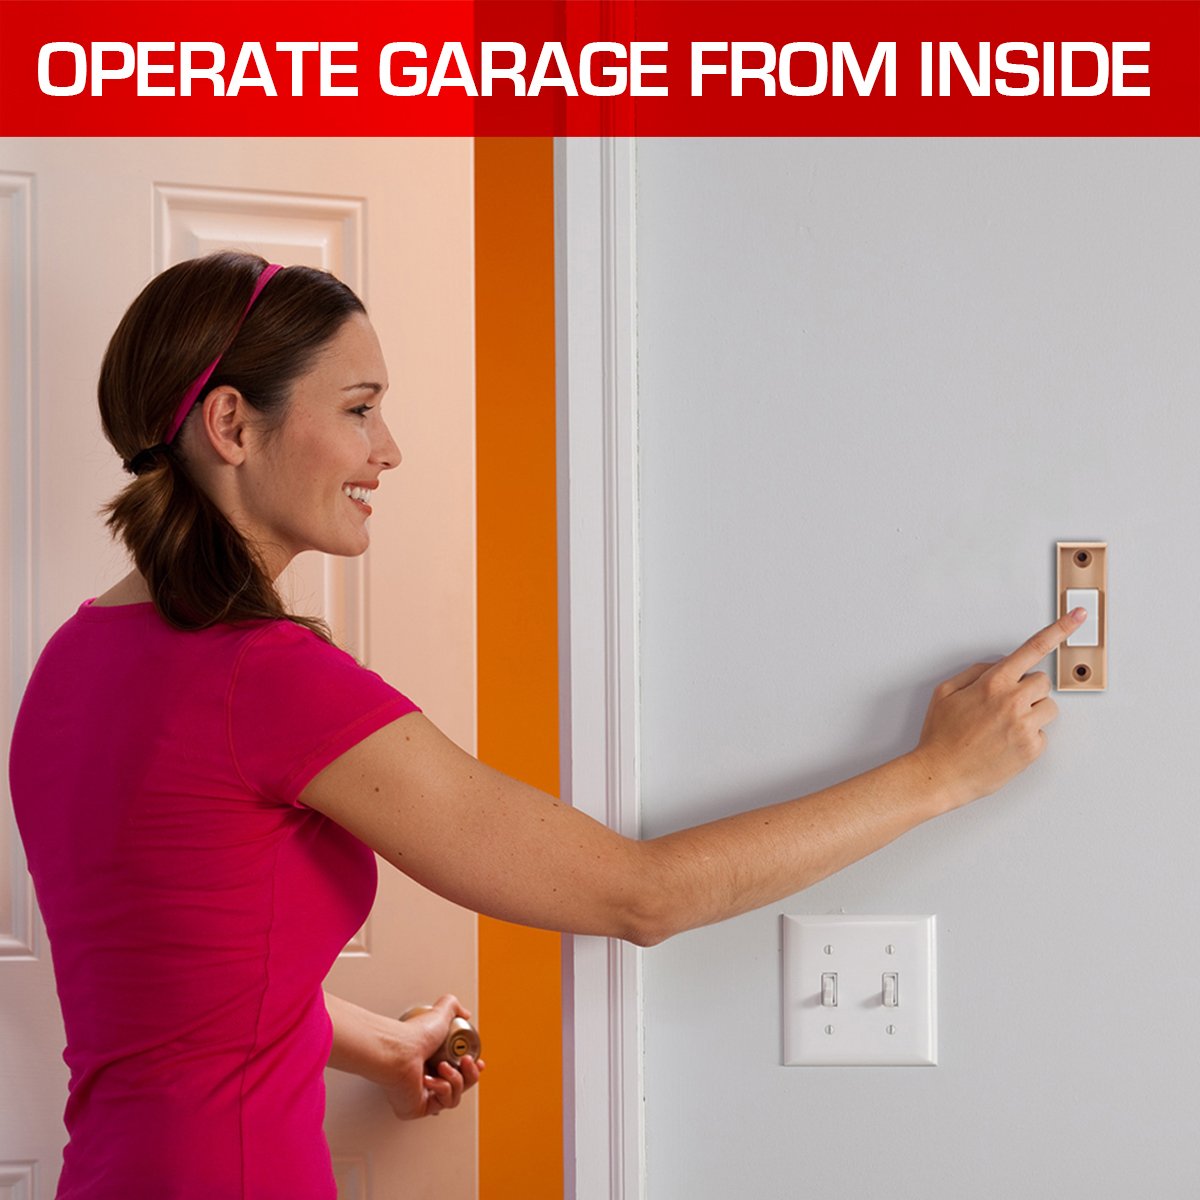 Genie's universal indoor push button makes it easy to open and close your garage door from inside the garage